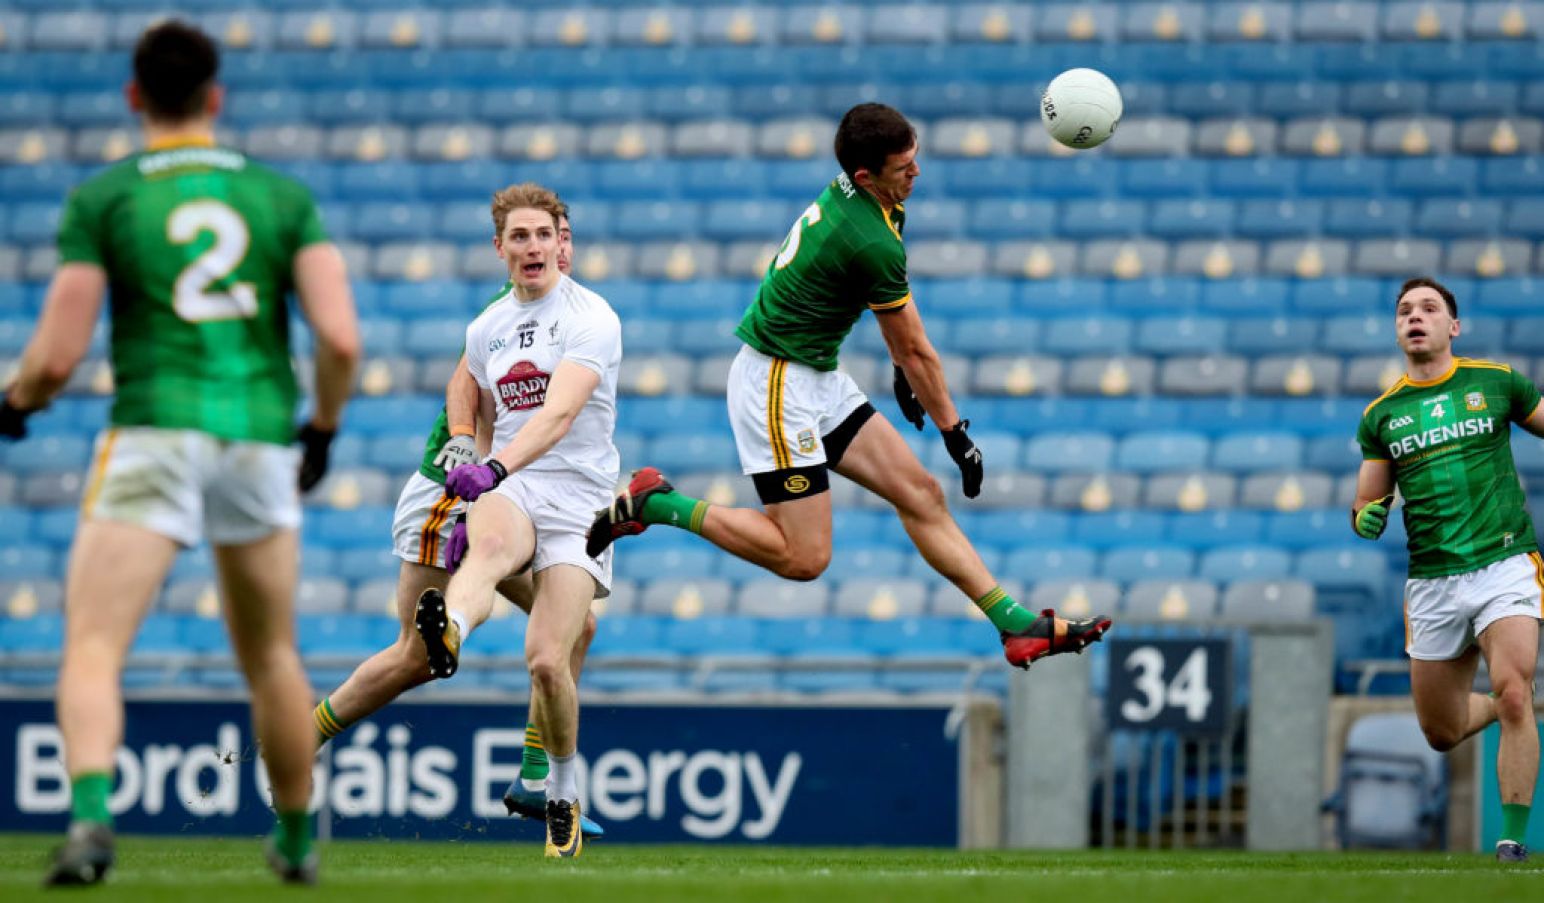 High Kick: Meath's Shane Mcentee Out-Jumps And Daniel Flynn Of Kildare. Credit ©Inpho/Ryan Byrne